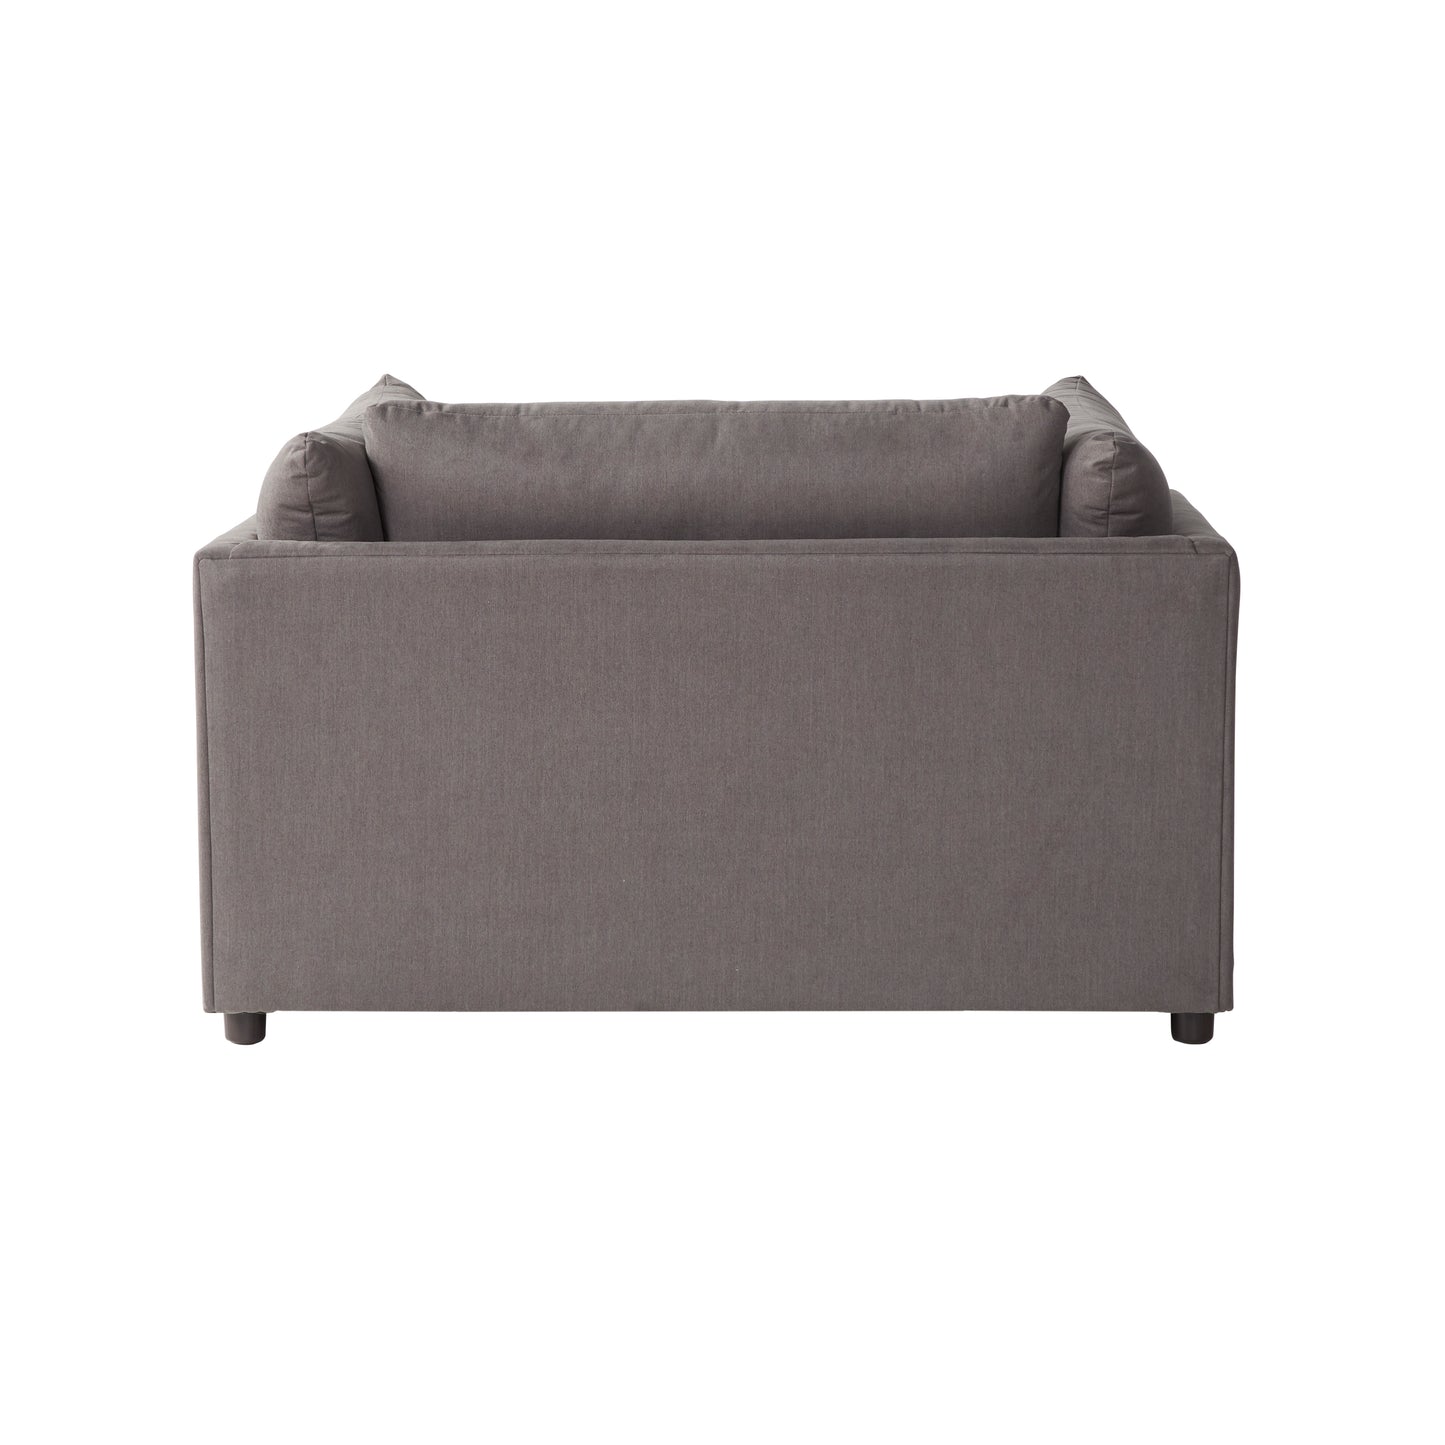 Roundhill Furniture Enda Pillow Back Fabric Sofa and Cuddler Chair Living Room Collection, Carbon Gray